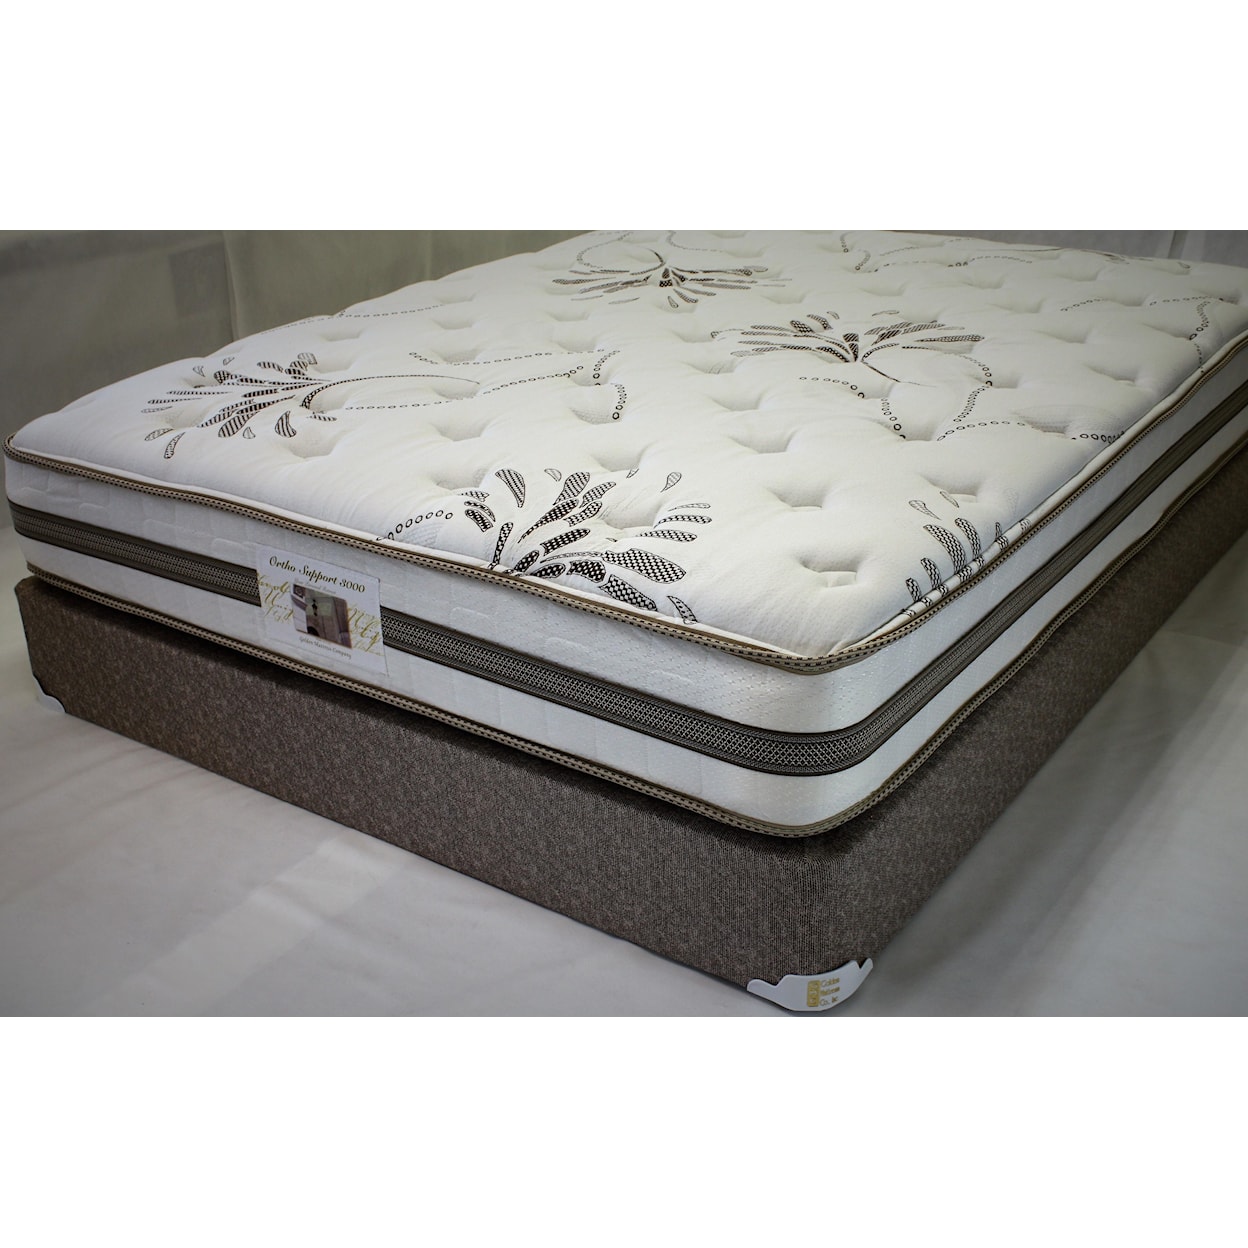 Golden Mattress Company Ortho Support 3000 Series Mattress and Foundation